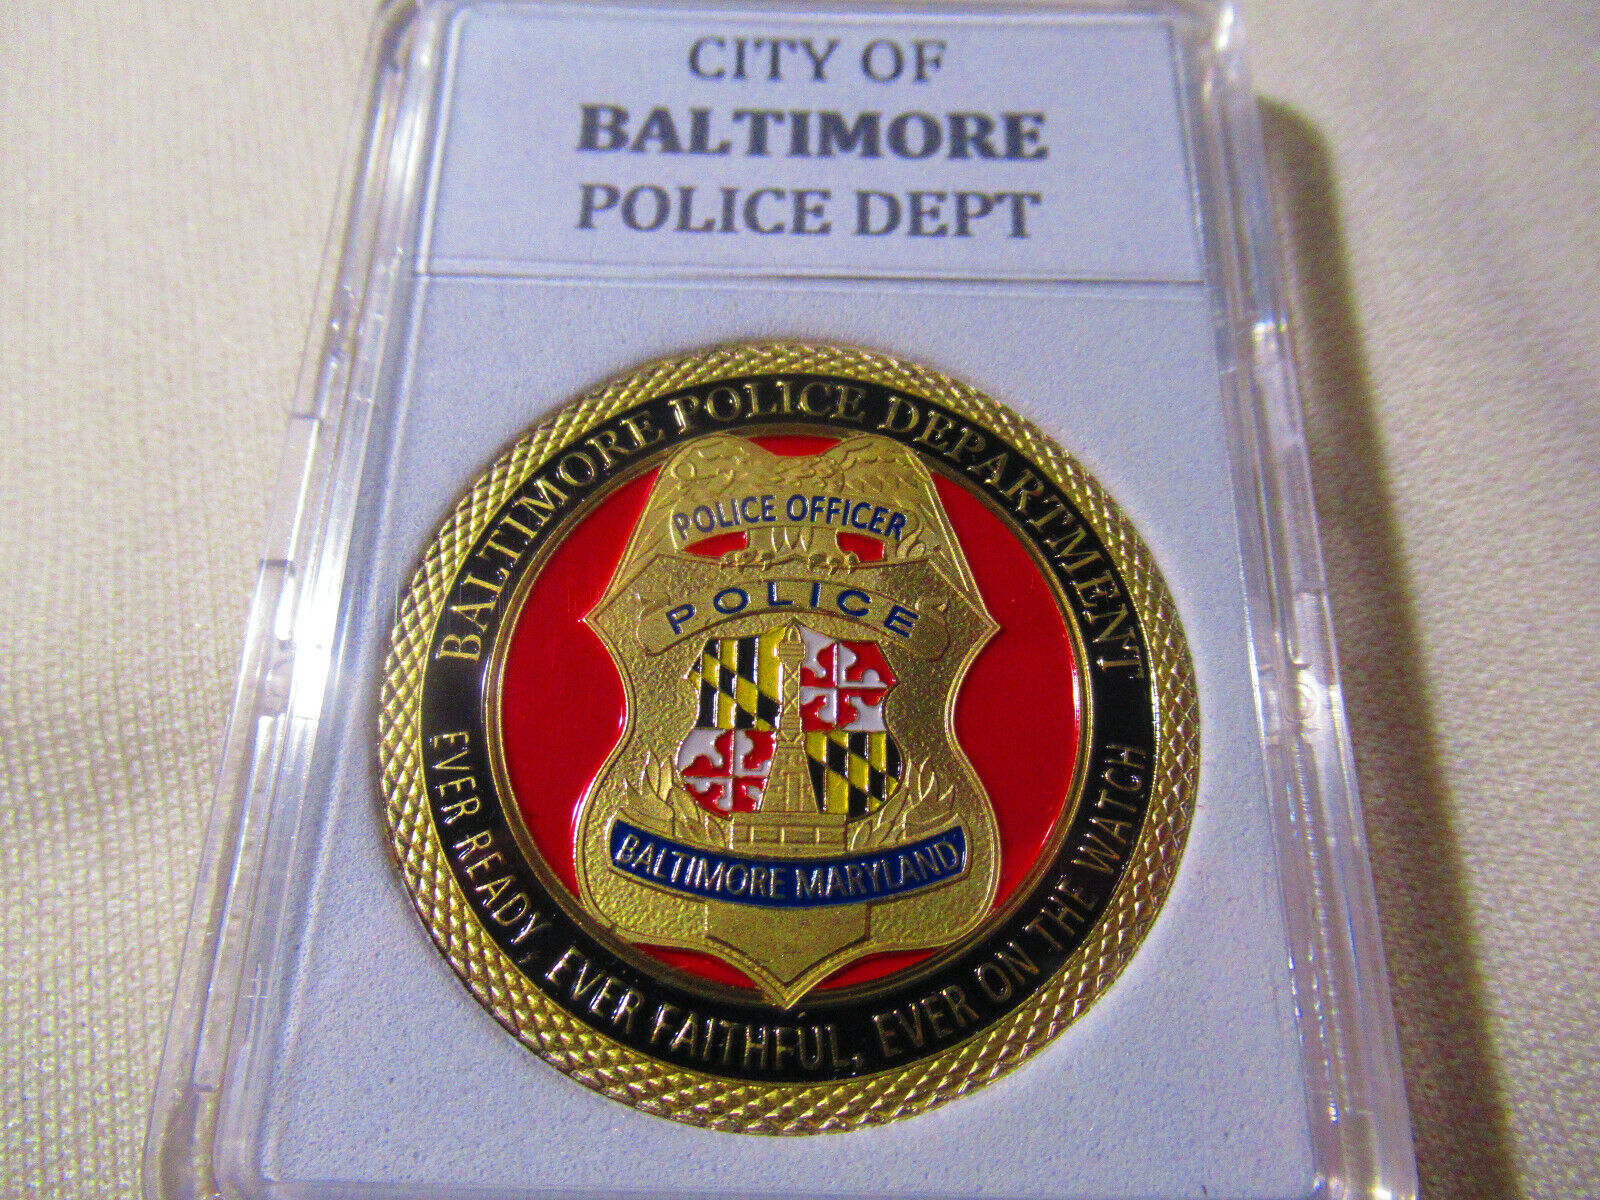 City of Baltimore Police Dept Challenge Coin